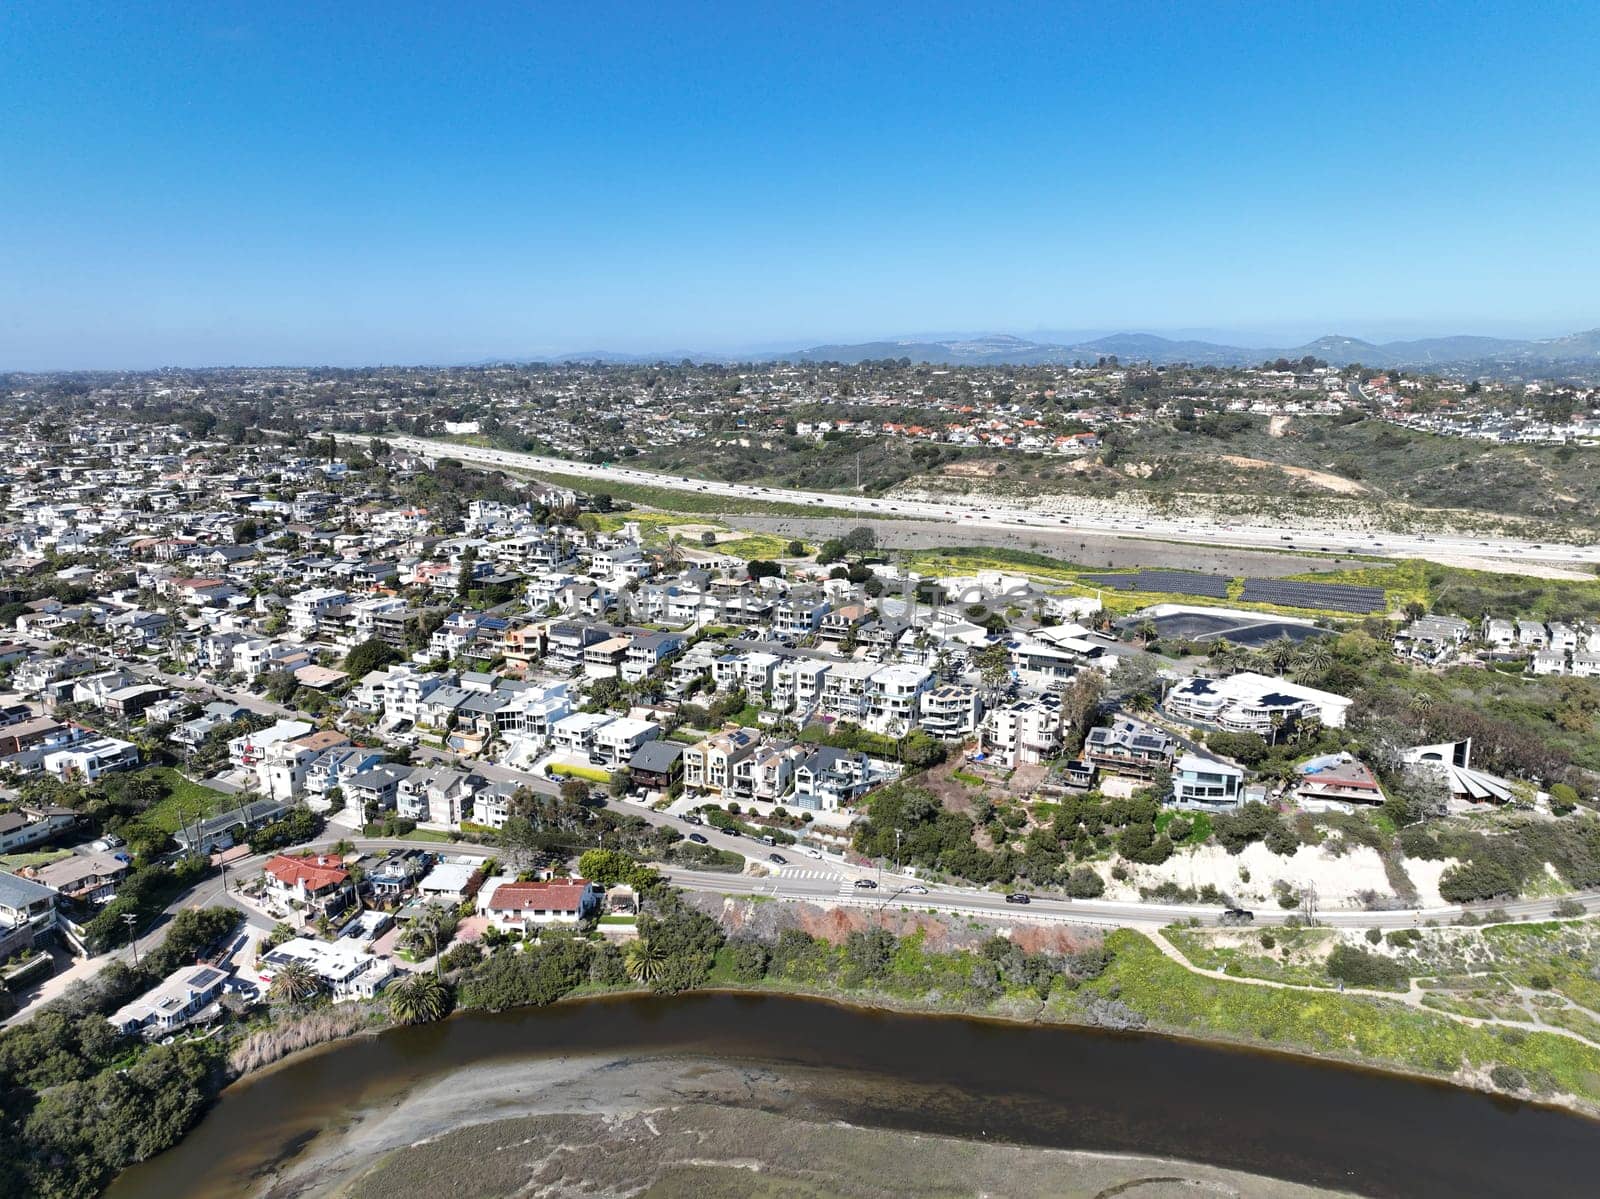 Aerial view of Wealthy Encinitas town in San Diego South California, USA.